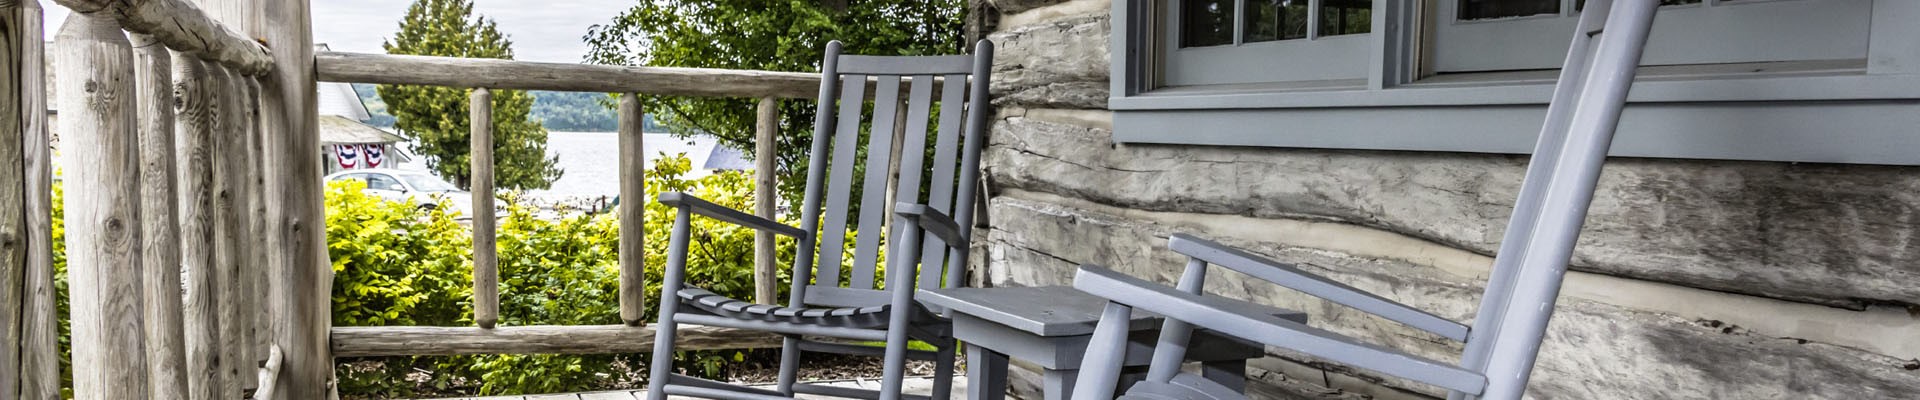 An old rocking chair sits on an outdoor porch on a summer day.